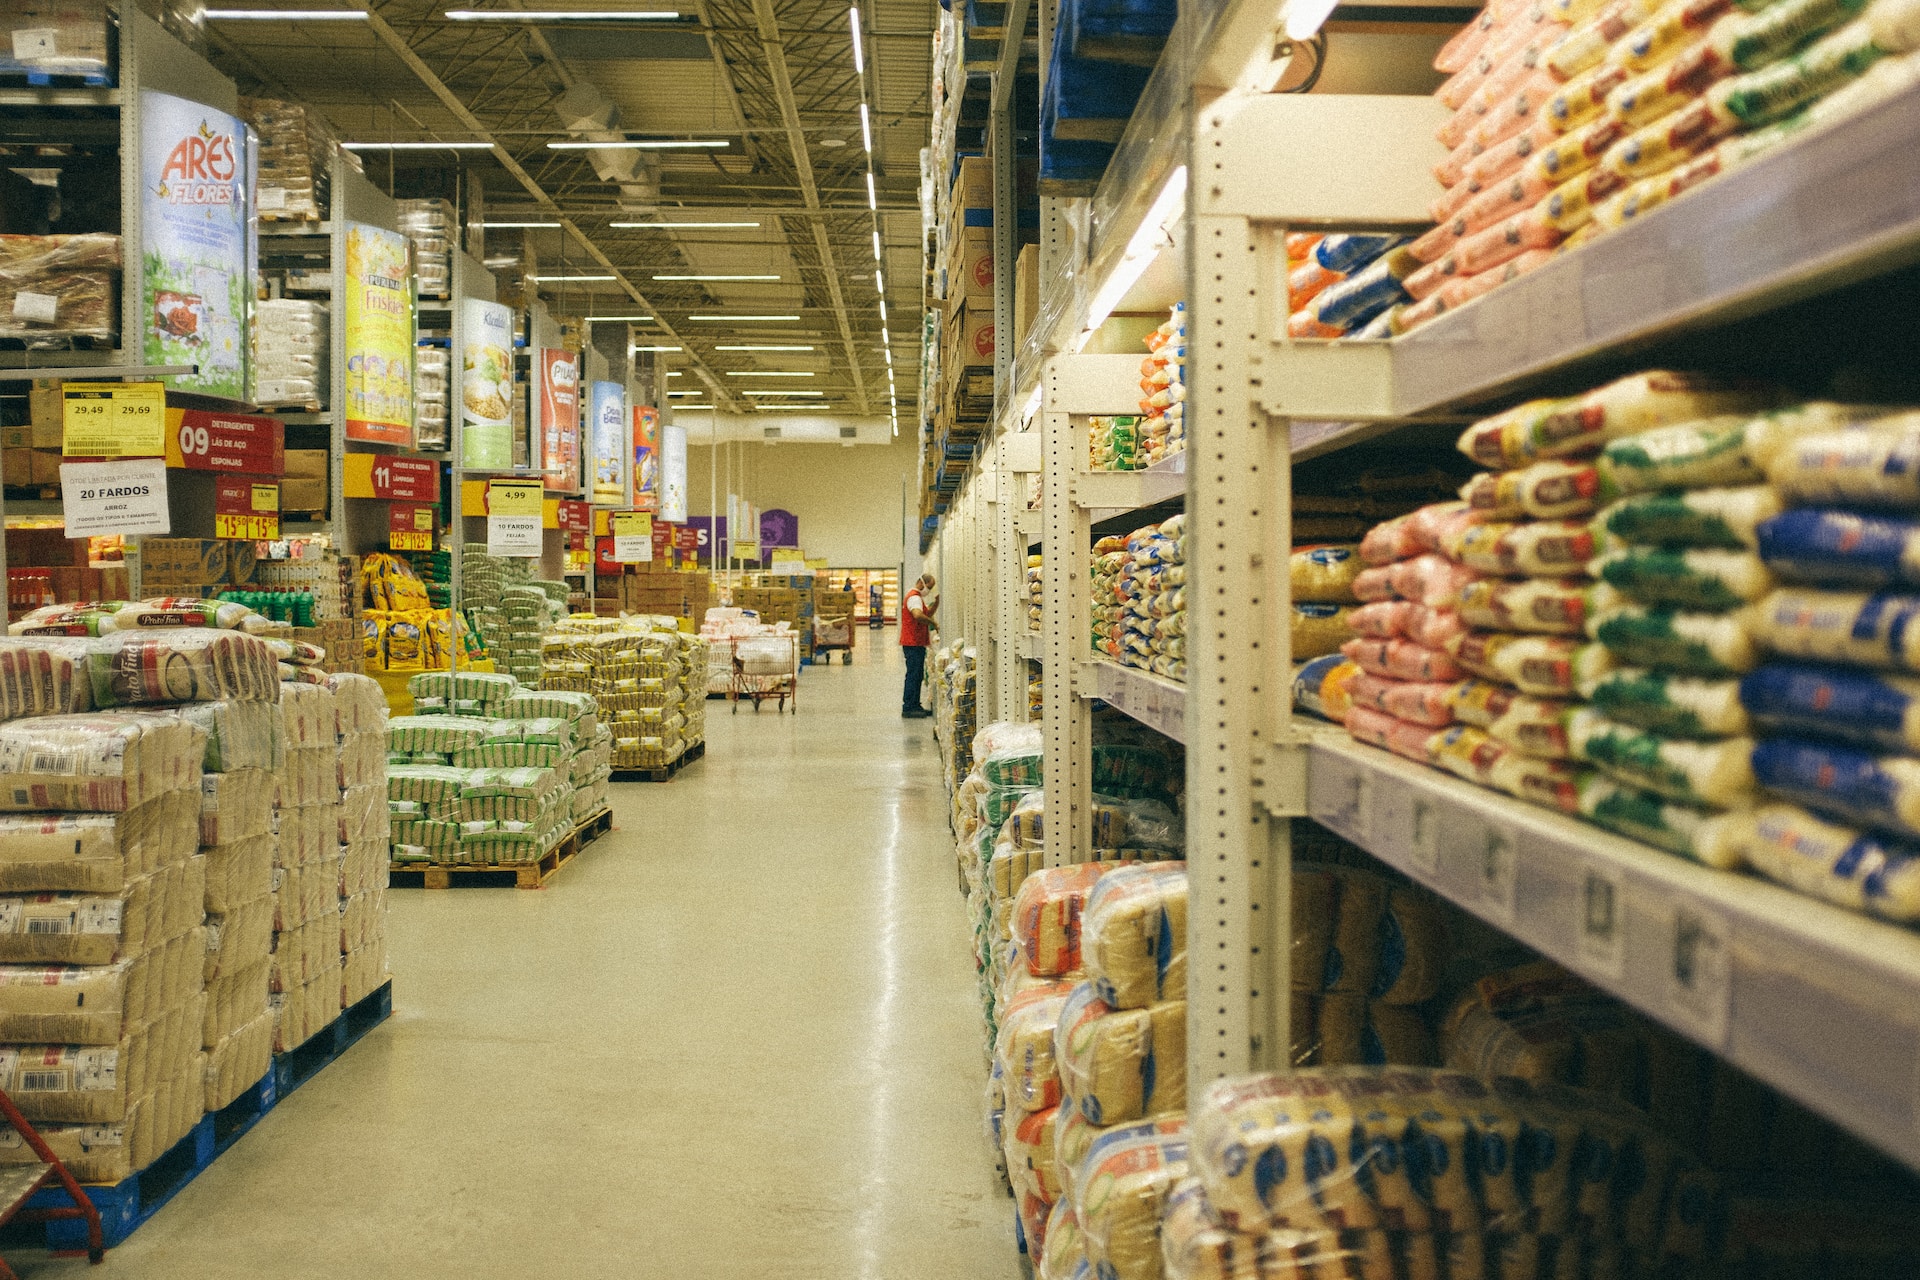 Global aisles of food in a grocery store.